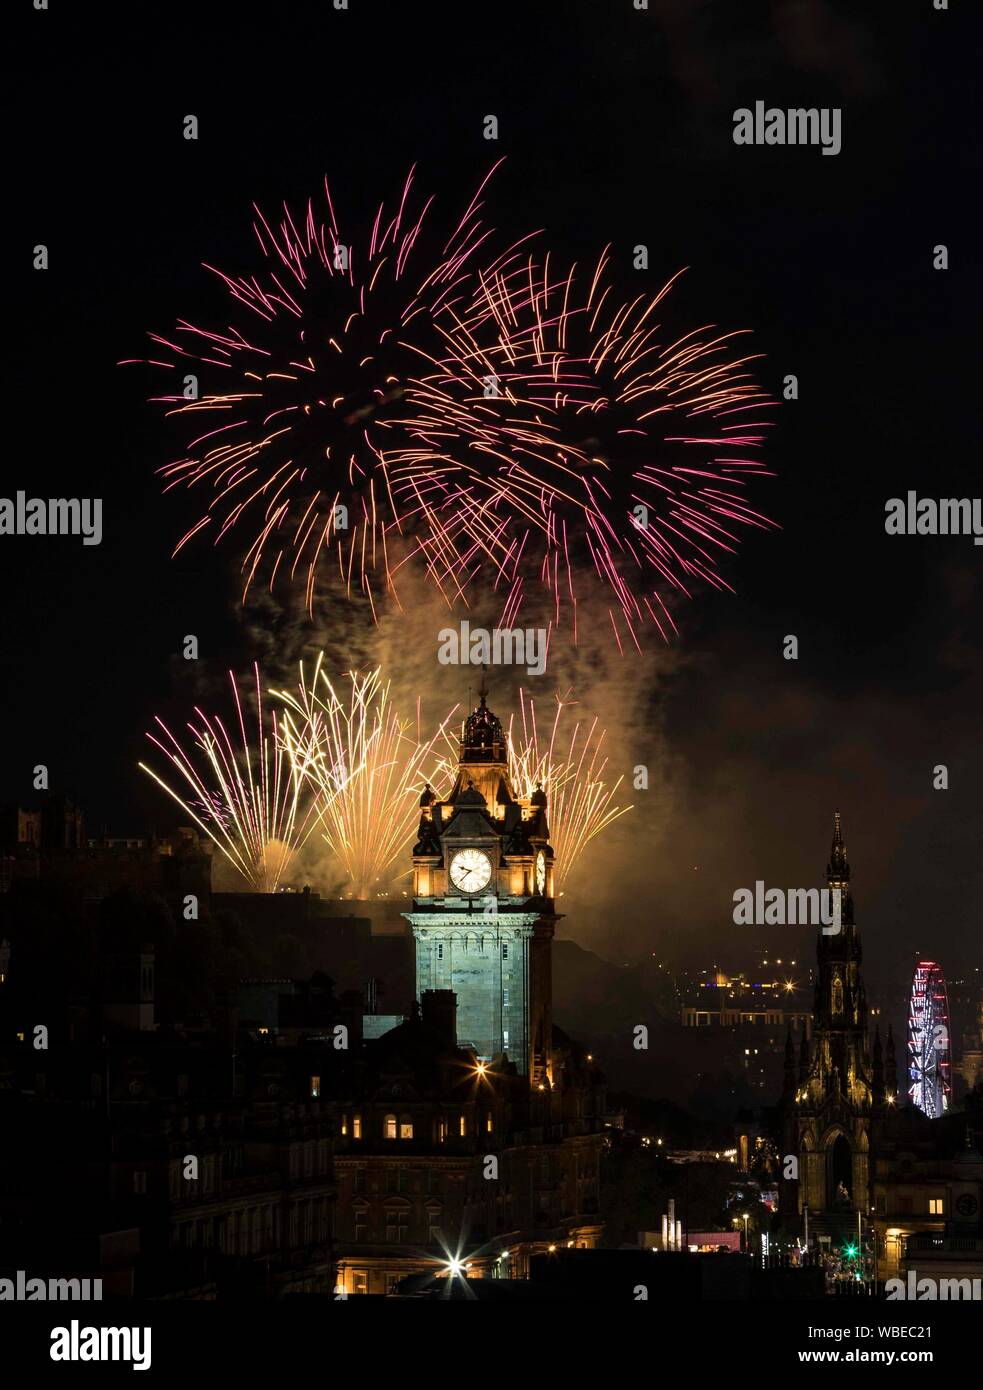 Edinburgh, UK. 26 August, 2019 Pictured: The spectacular Virgin Money Fireworks Concert, which marks the end of the Edinburgh International Festival, brings together the Scottish Chamber Orchestra, and fireworks specially choreographed by international pyrotechnics artists, Pyrovision all set against the magnificent backdrop of Edinburgh Castle. Credit: Rich Dyson/Alamy Live News Stock Photo